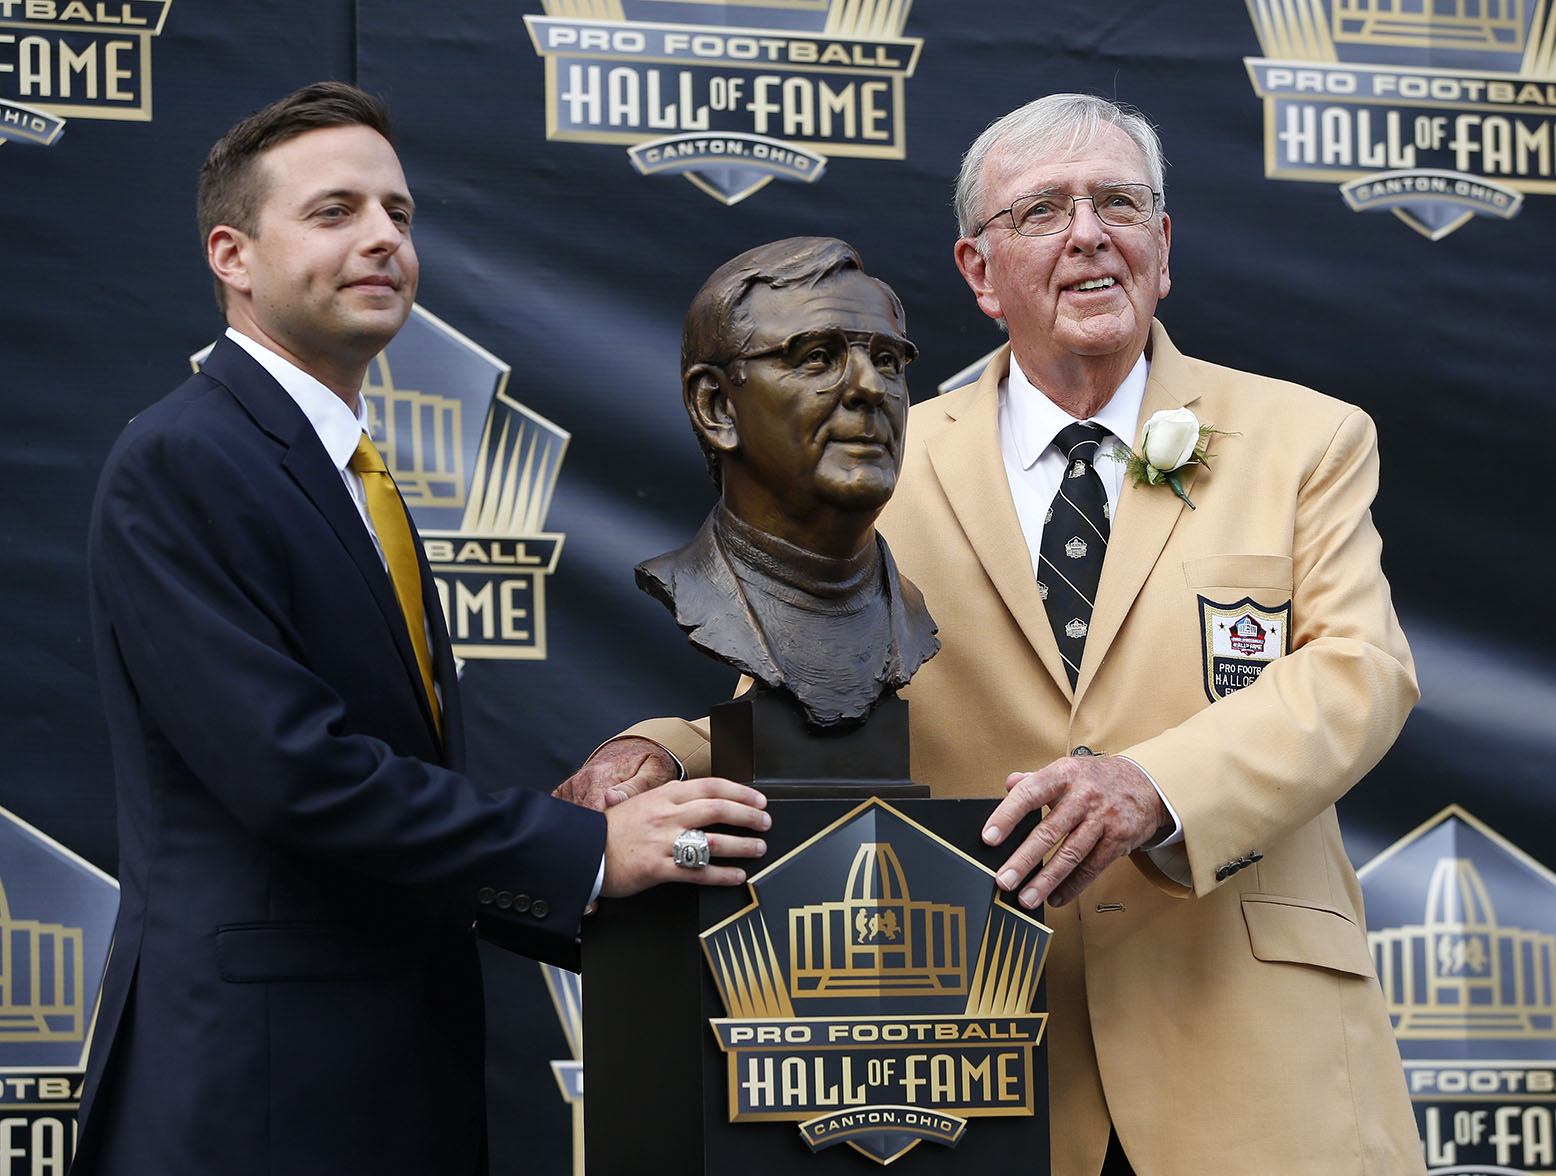 CANTON, OH - AUGUST 8: Ron Wolf and his son Eliot pose with Wolf's bust during the NFL Hall of Fame induction ceremony at Tom Benson Hall of Fame Stadium on August 8, 2015 in Canton, Ohio. (Photo by Joe Robbins/Getty Images)